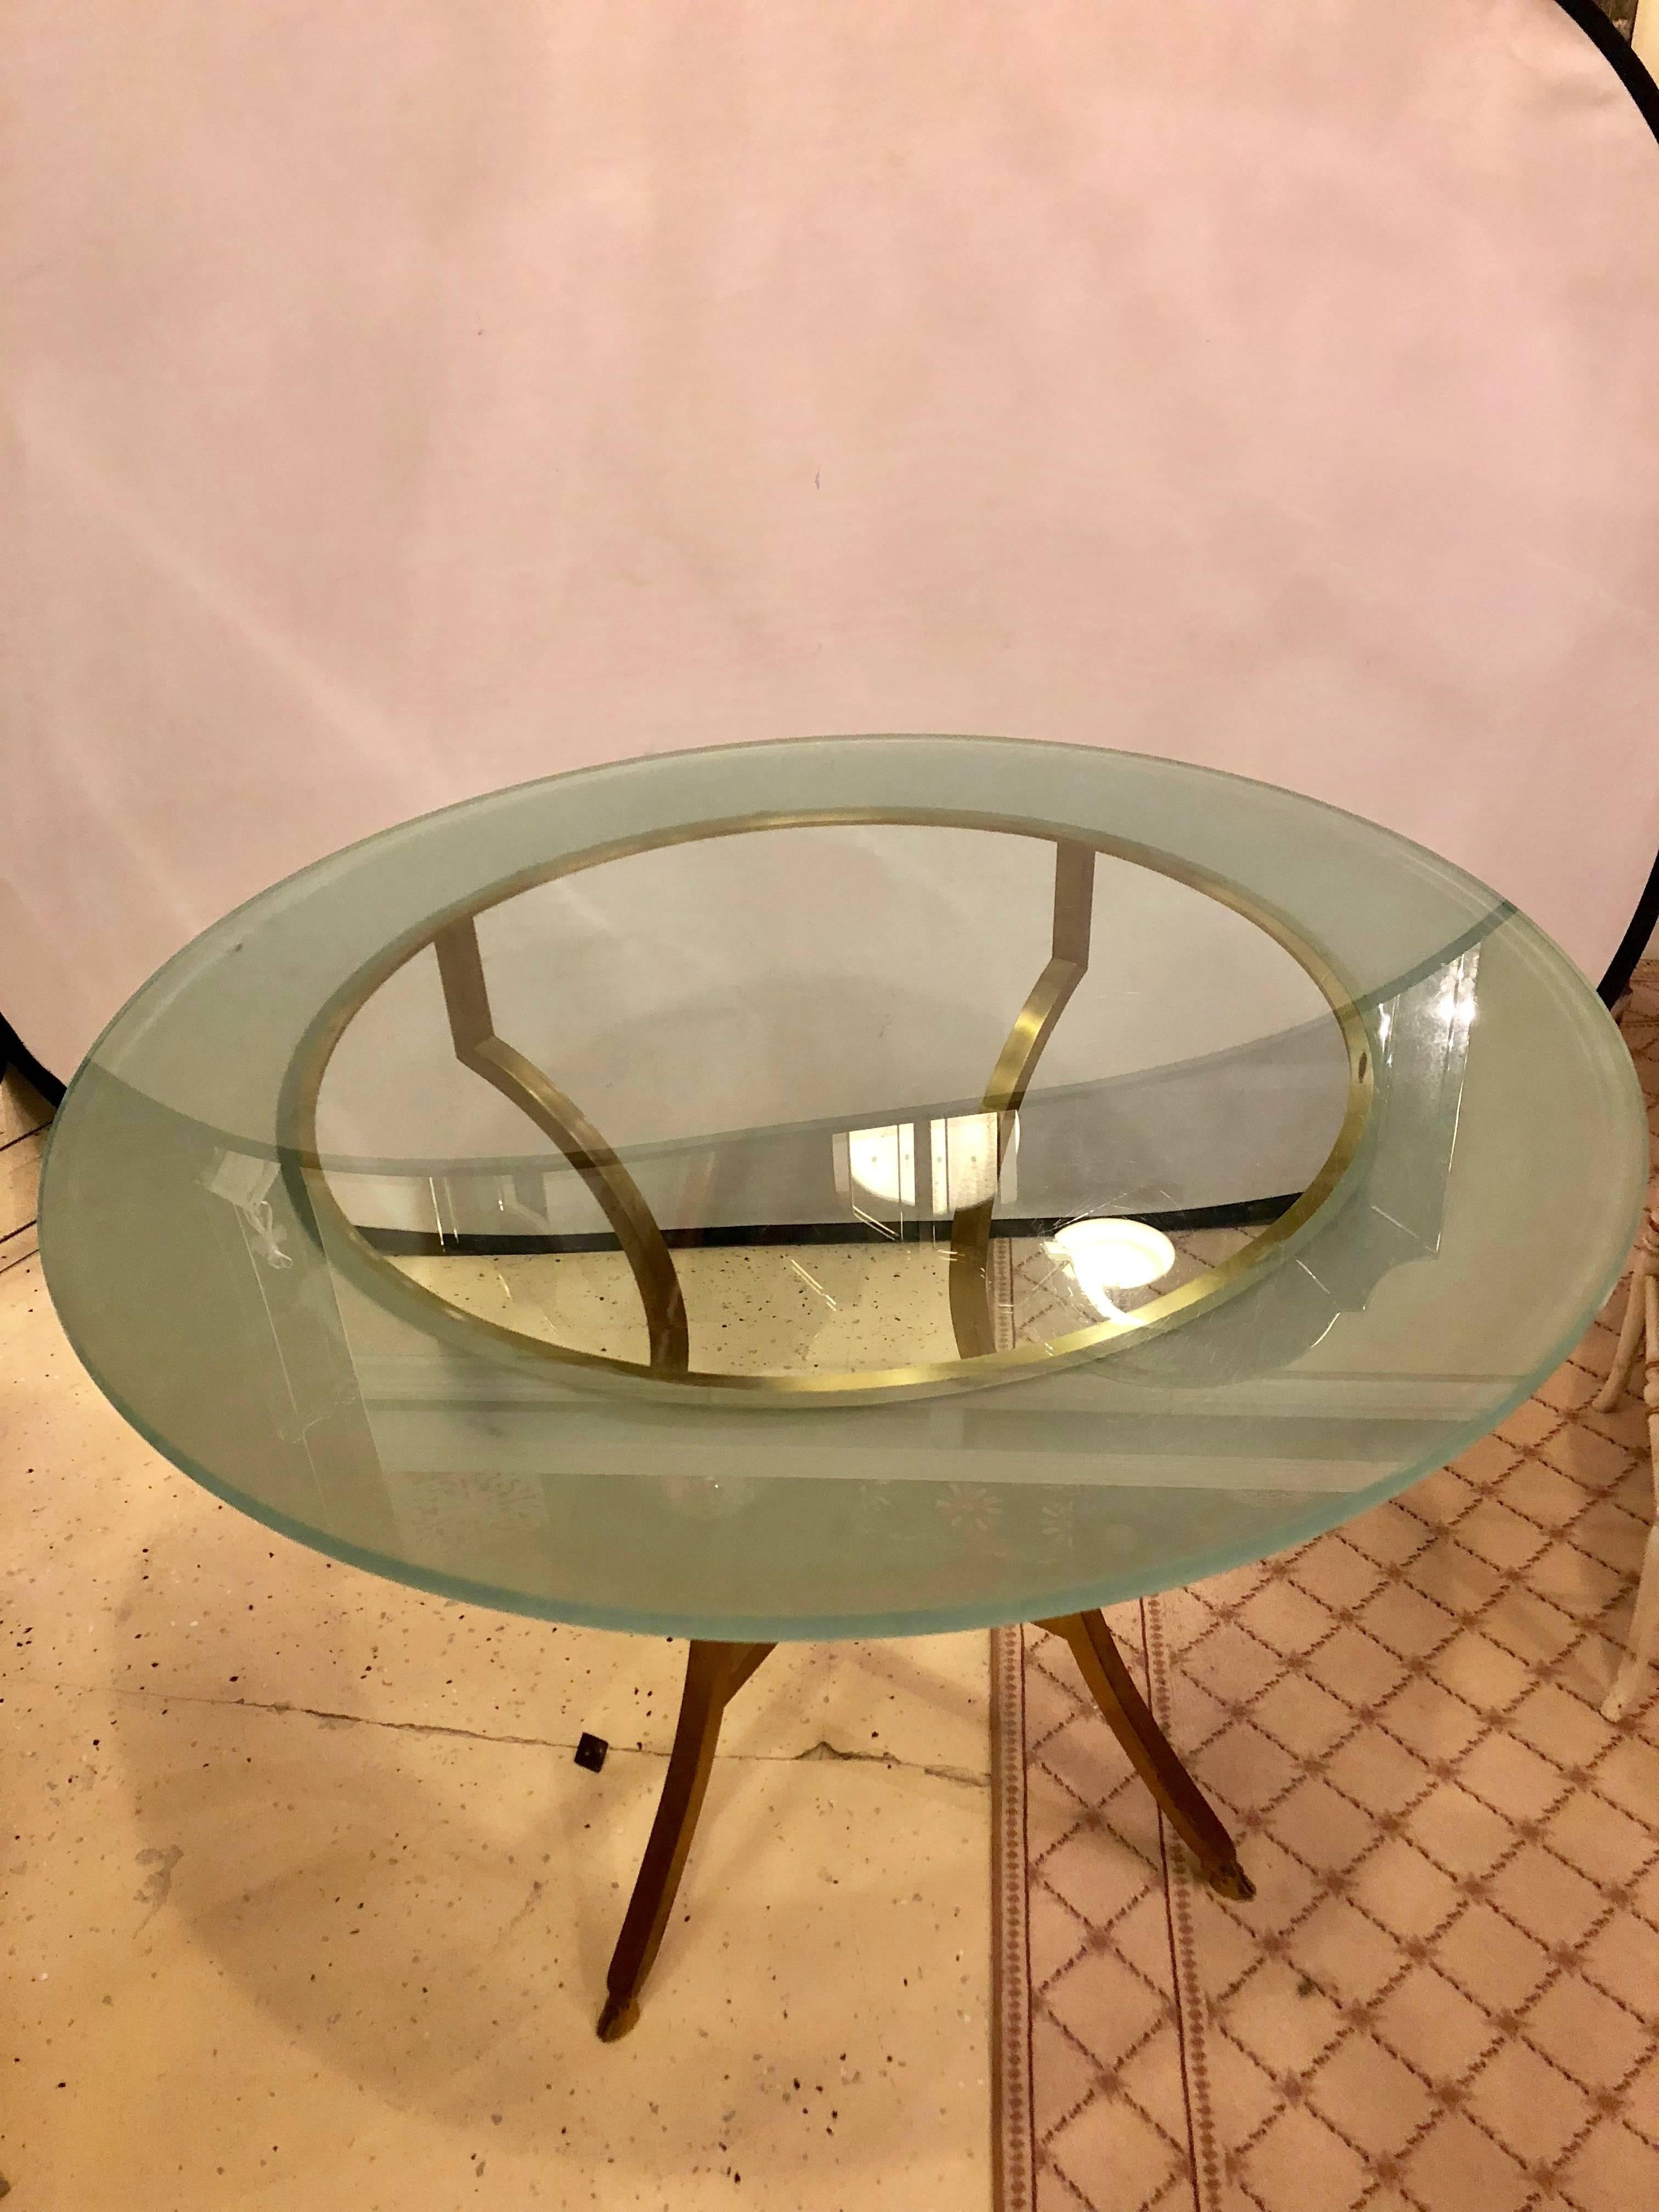 20th Century Hollywood Regency Style Glass Top Bronze Based Center Table or Dining Table